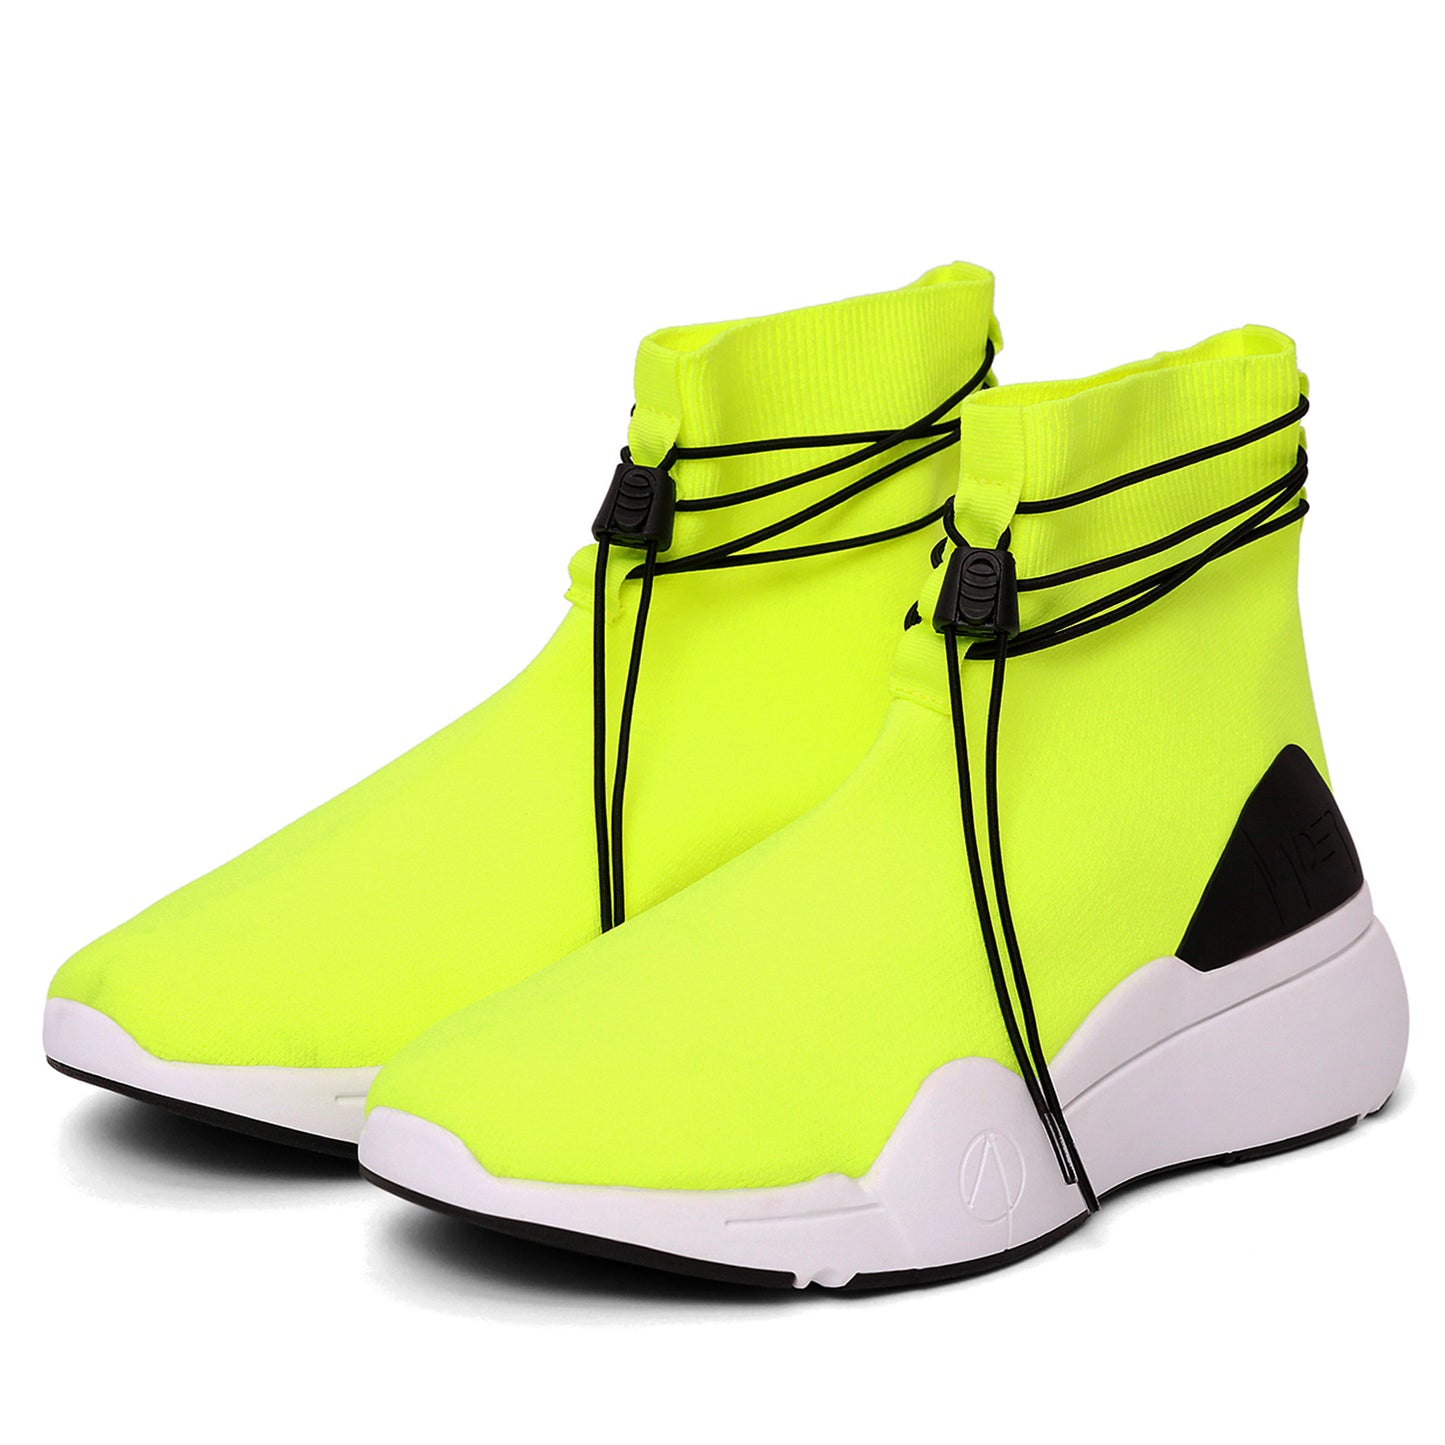 ELLIPSIS GYM SOCK TRAINER IN NEON, BLACK AND WHITE